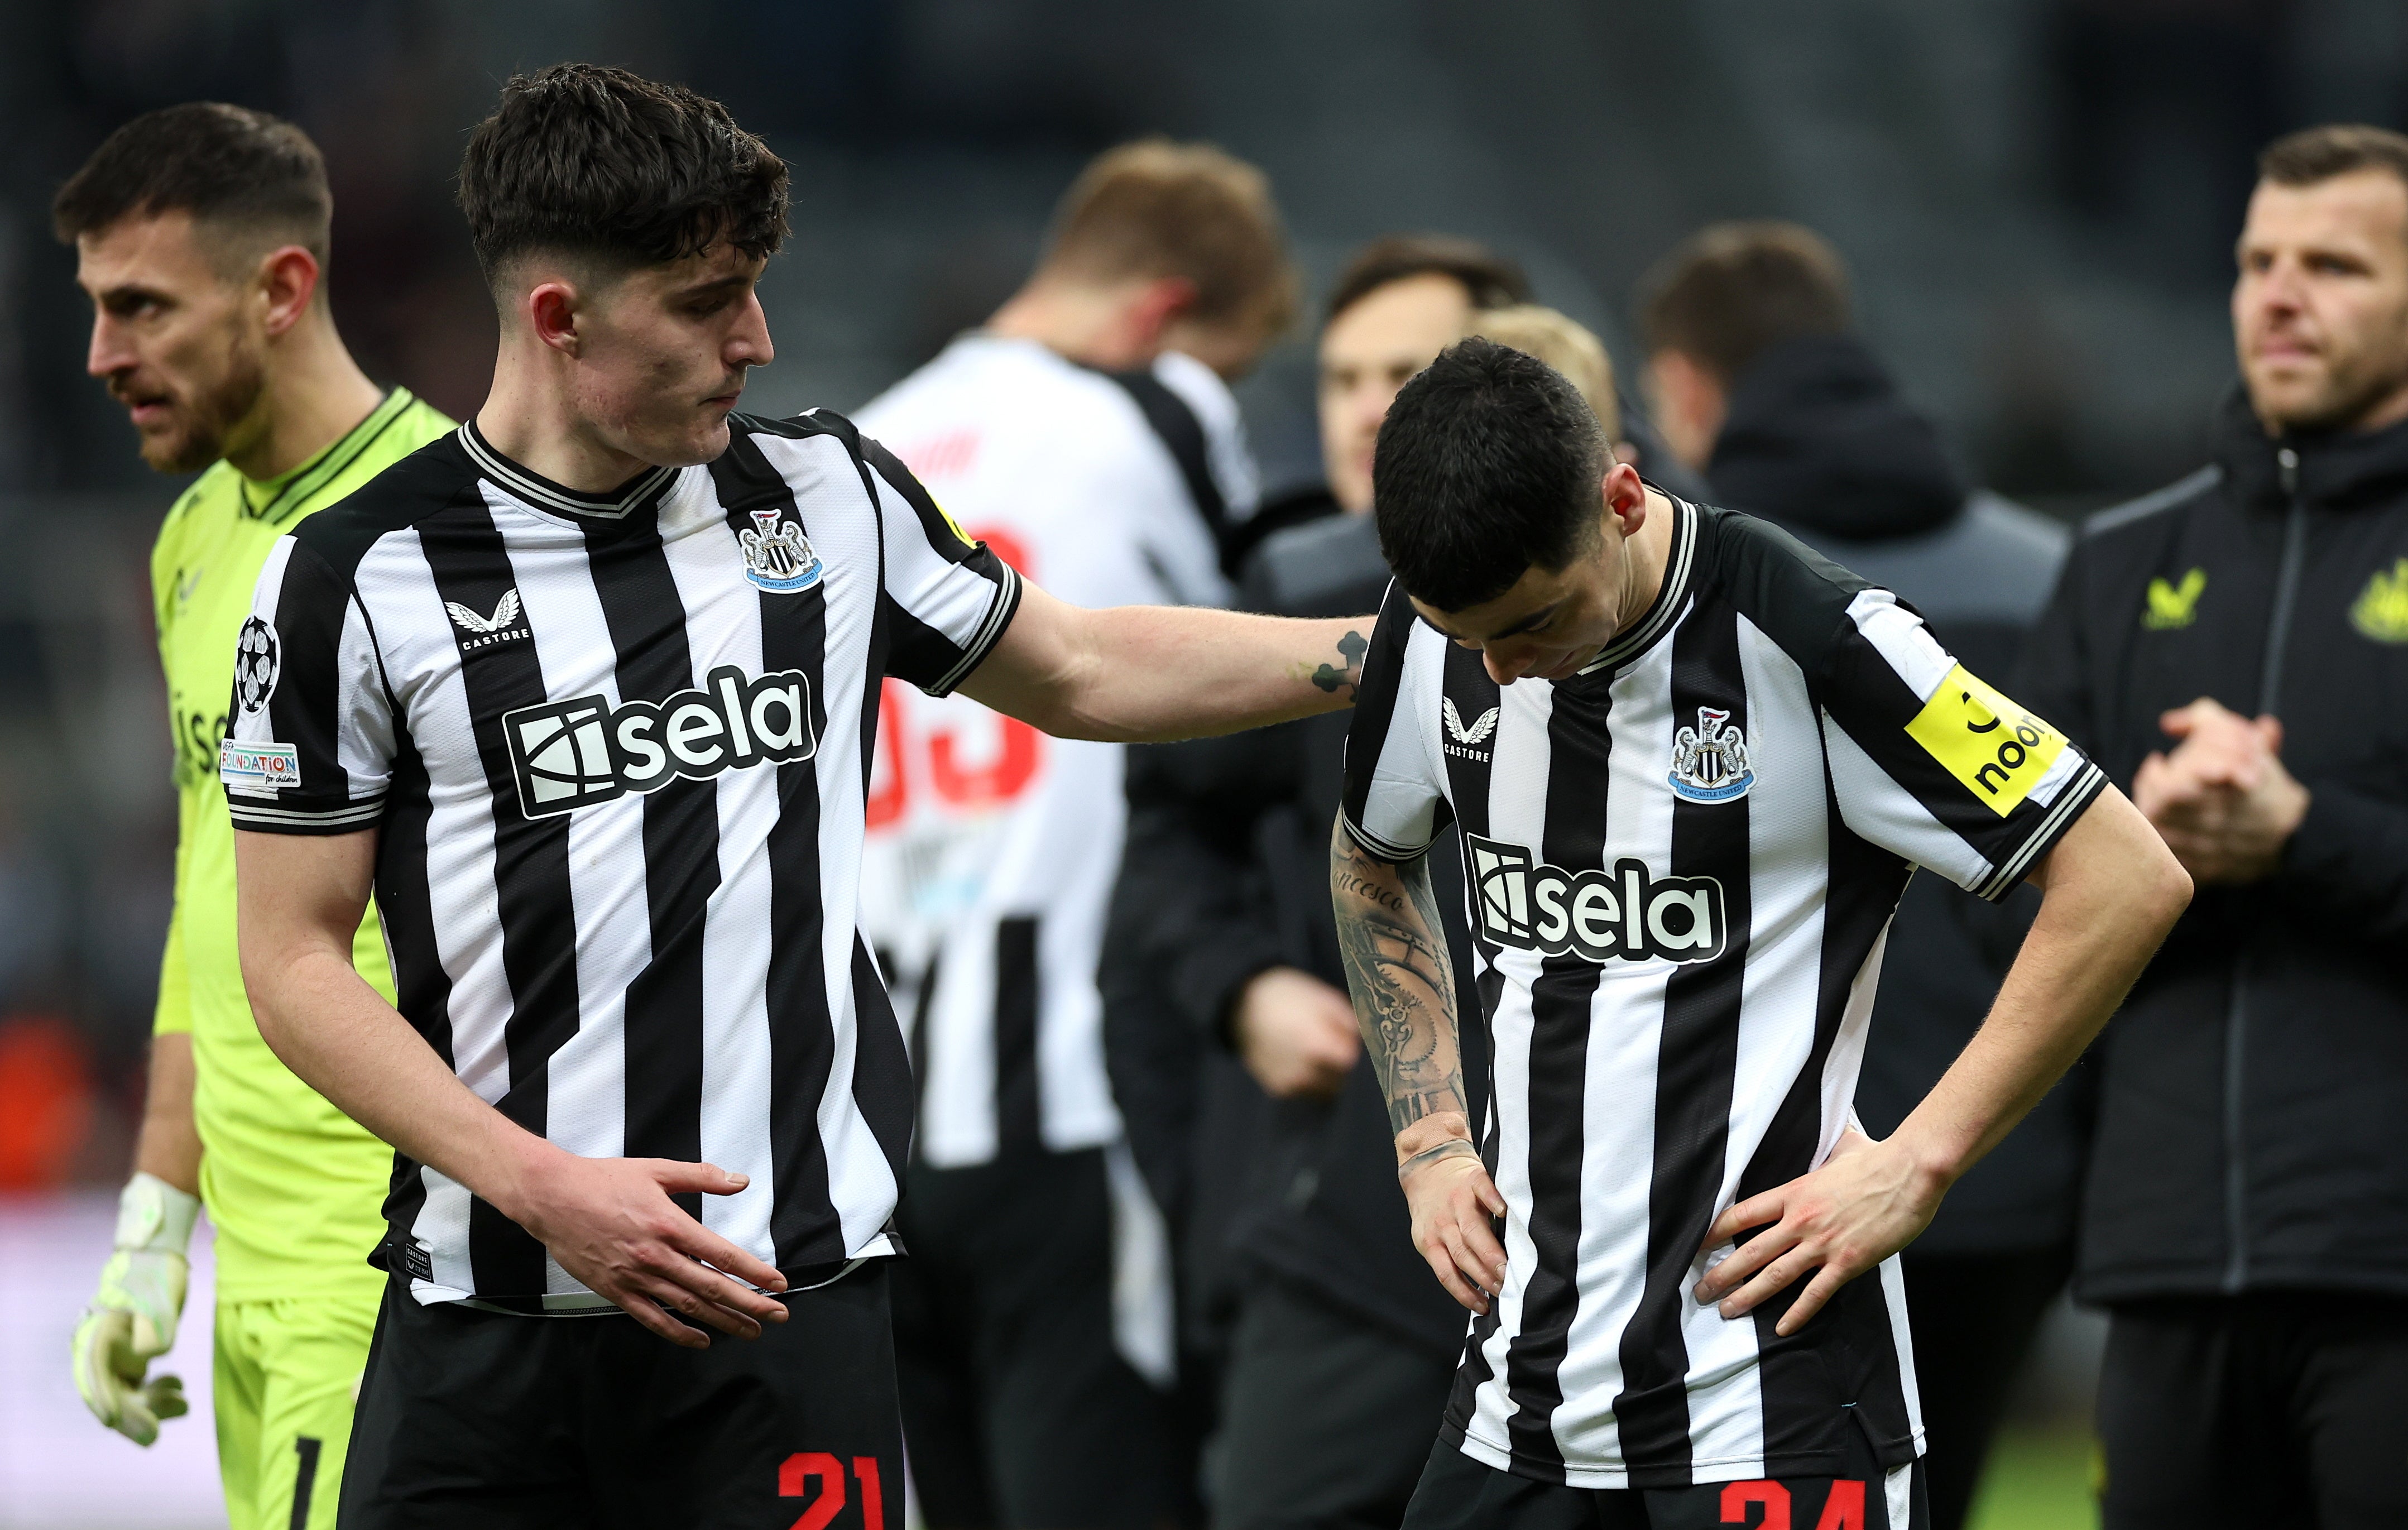 Newcastle’s undeservedly dropped out of Europe entirely following defeat to AC Milan